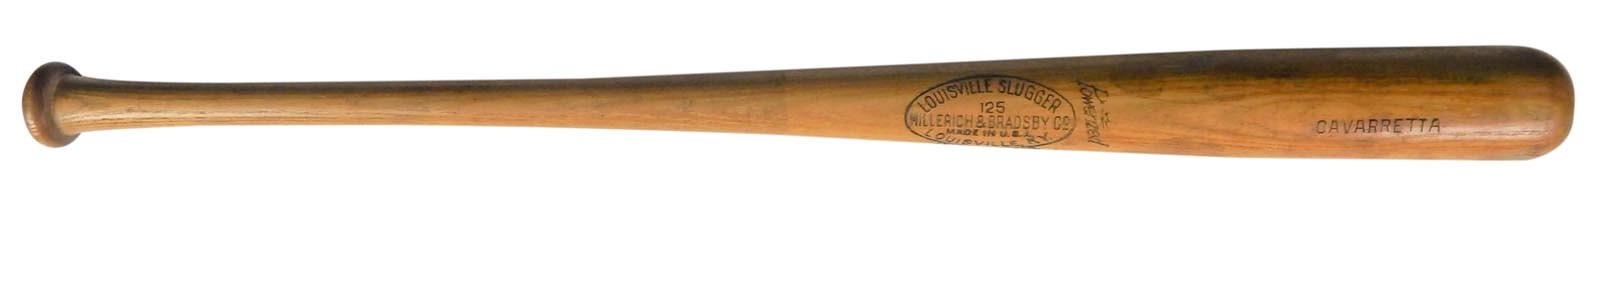 Chicago Cubs & Wrigley Field - Early 1940's Phil Cavarretta Game Used Bat "MVP and Batting Champ"